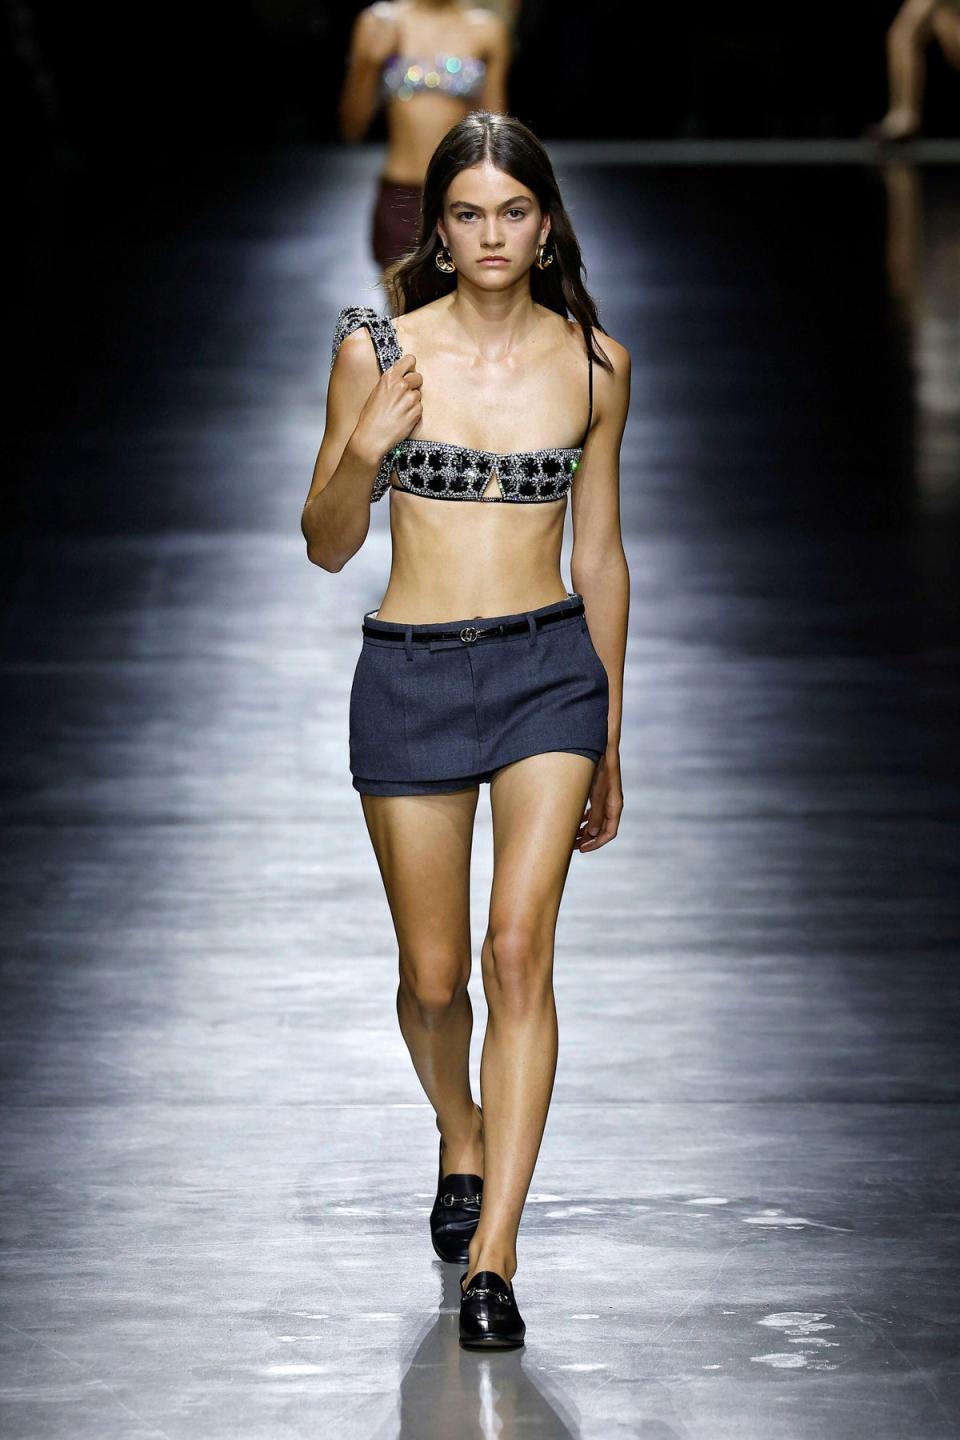 Get shorty: Model wears hotpants on the Gucci SS24 Runway (Alamy Stock Photo)